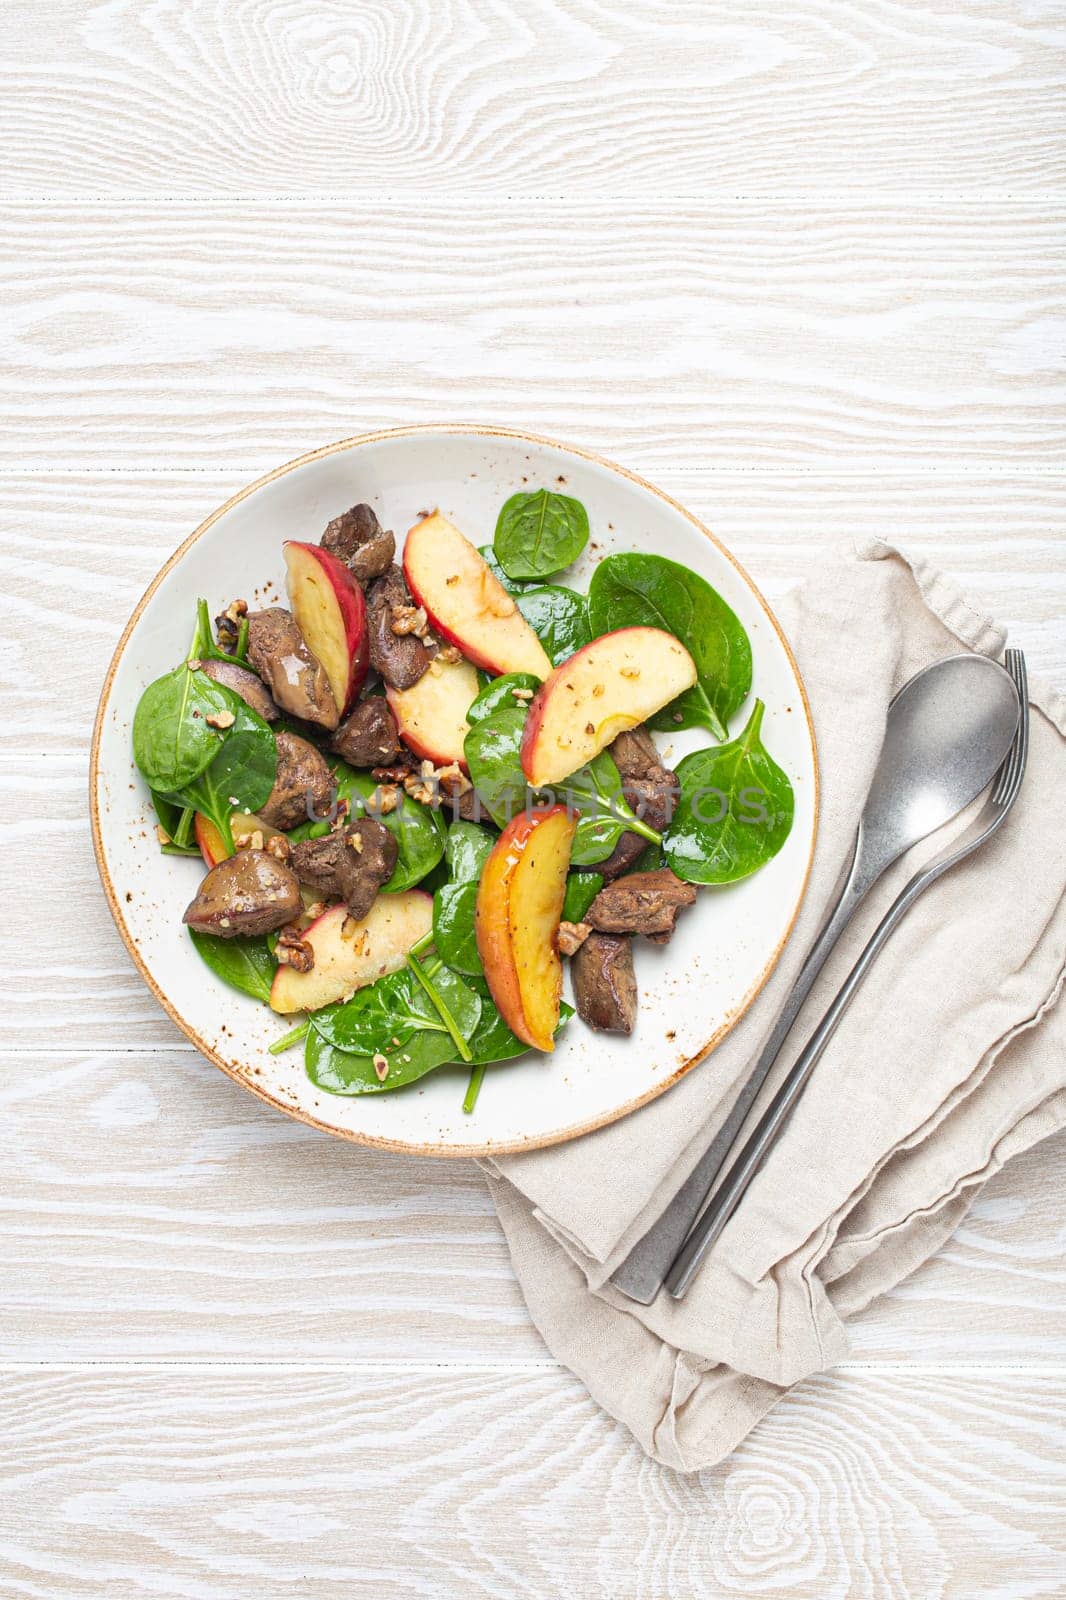 Healthy Salad with Iron Rich Ingredients Chicken Liver, Apples, Fresh Spinach and Walnuts on White Ceramic Plate, White Wooden Background From Above.